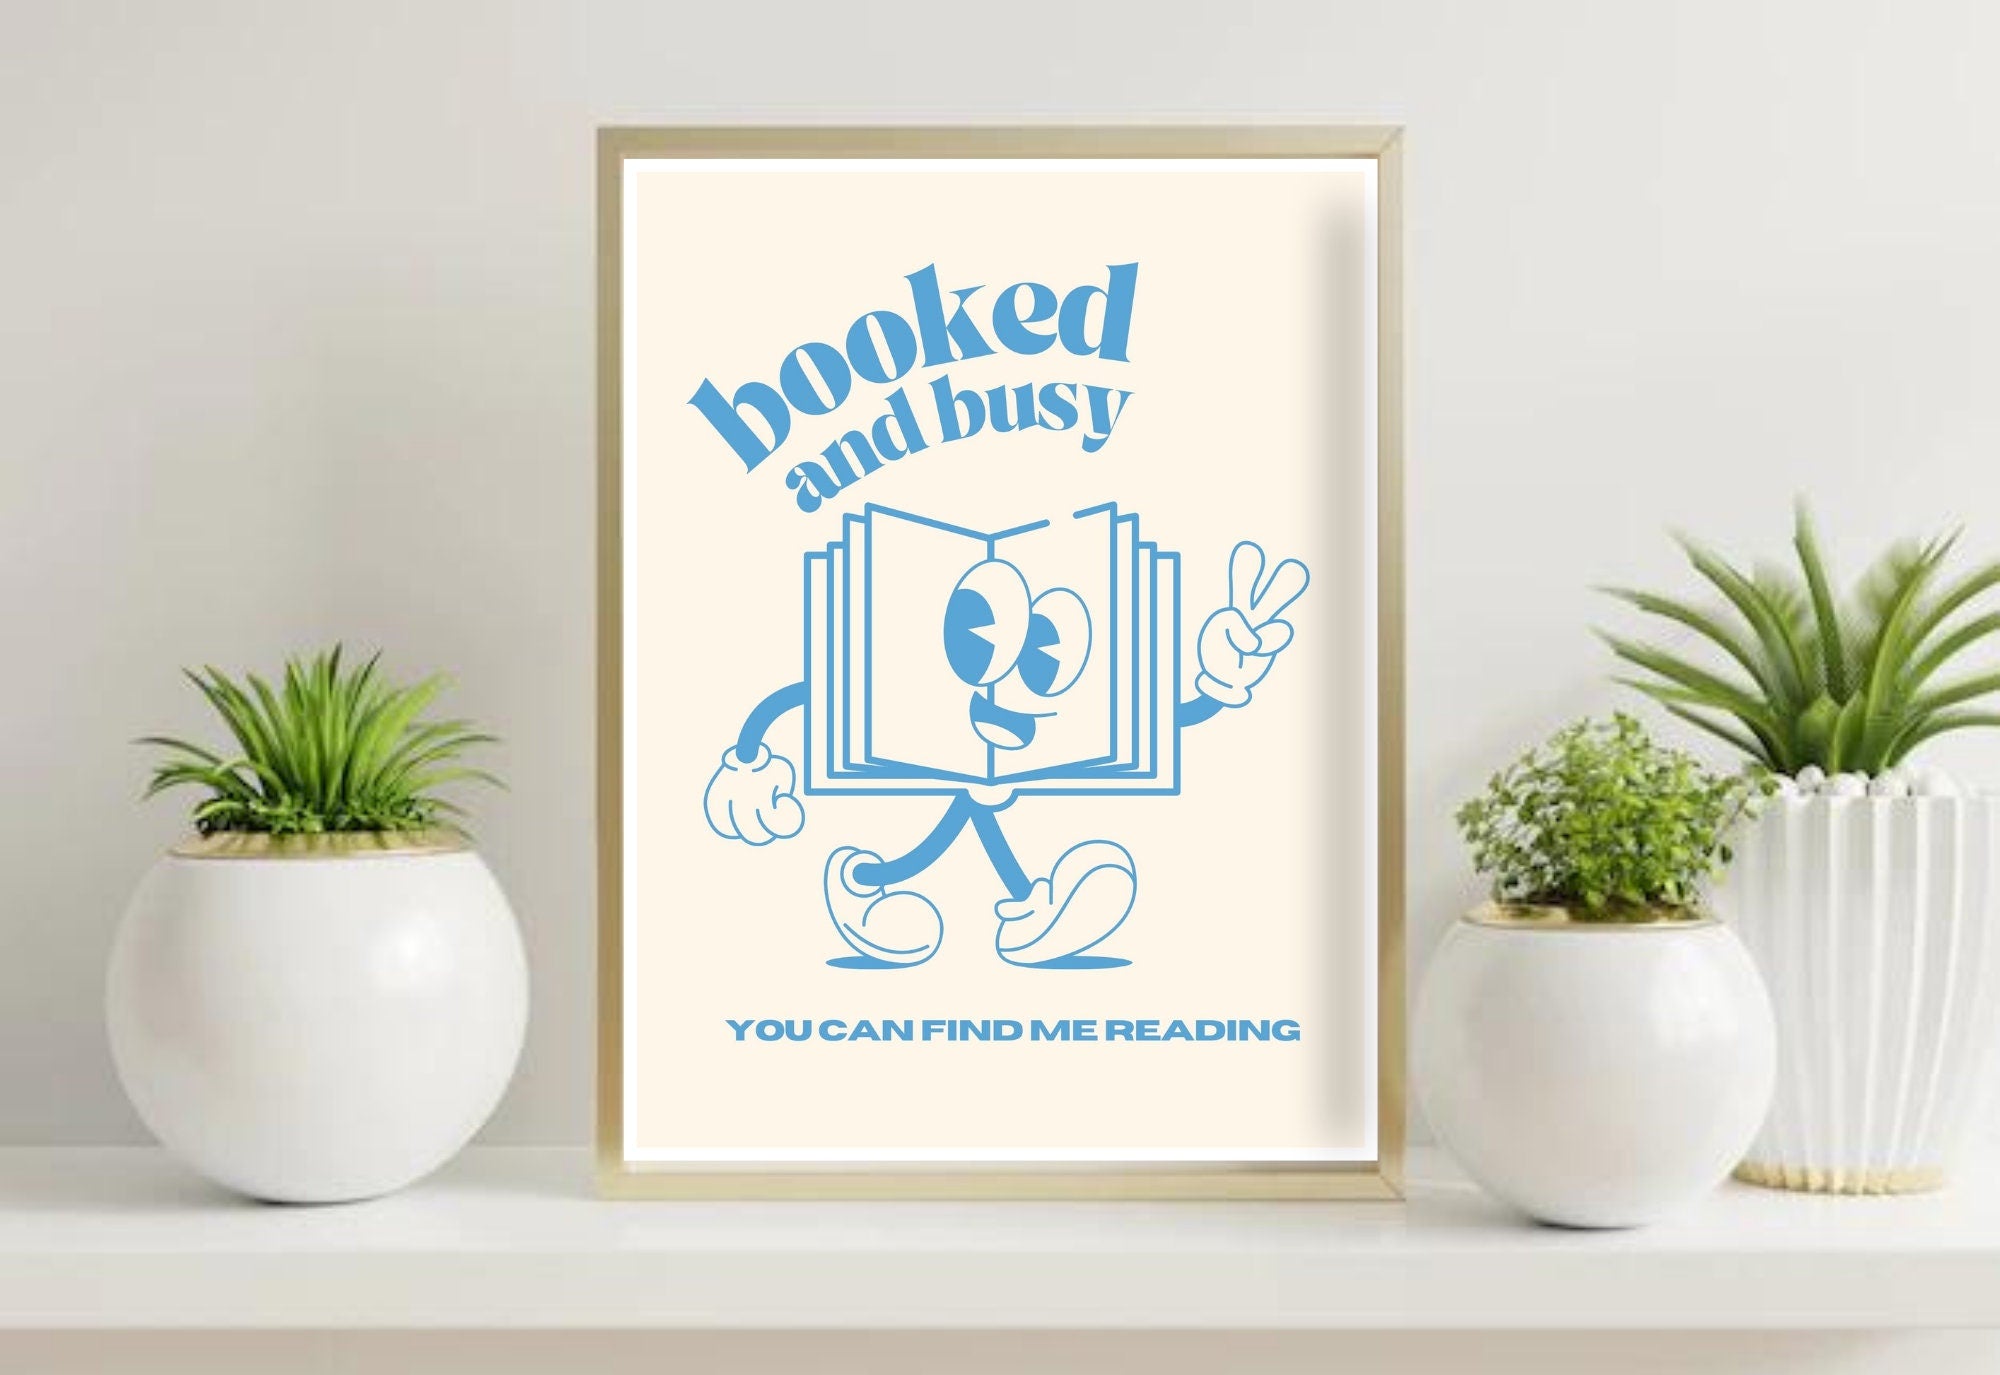 Booked and Busy Light Blue Digital Art Print featuring playful, retro typography in a light blue color scheme. This downloadable wall art is the perfect addition to any space, from your home office to your bedroom. Order yours today and start living your best booked and busy life!